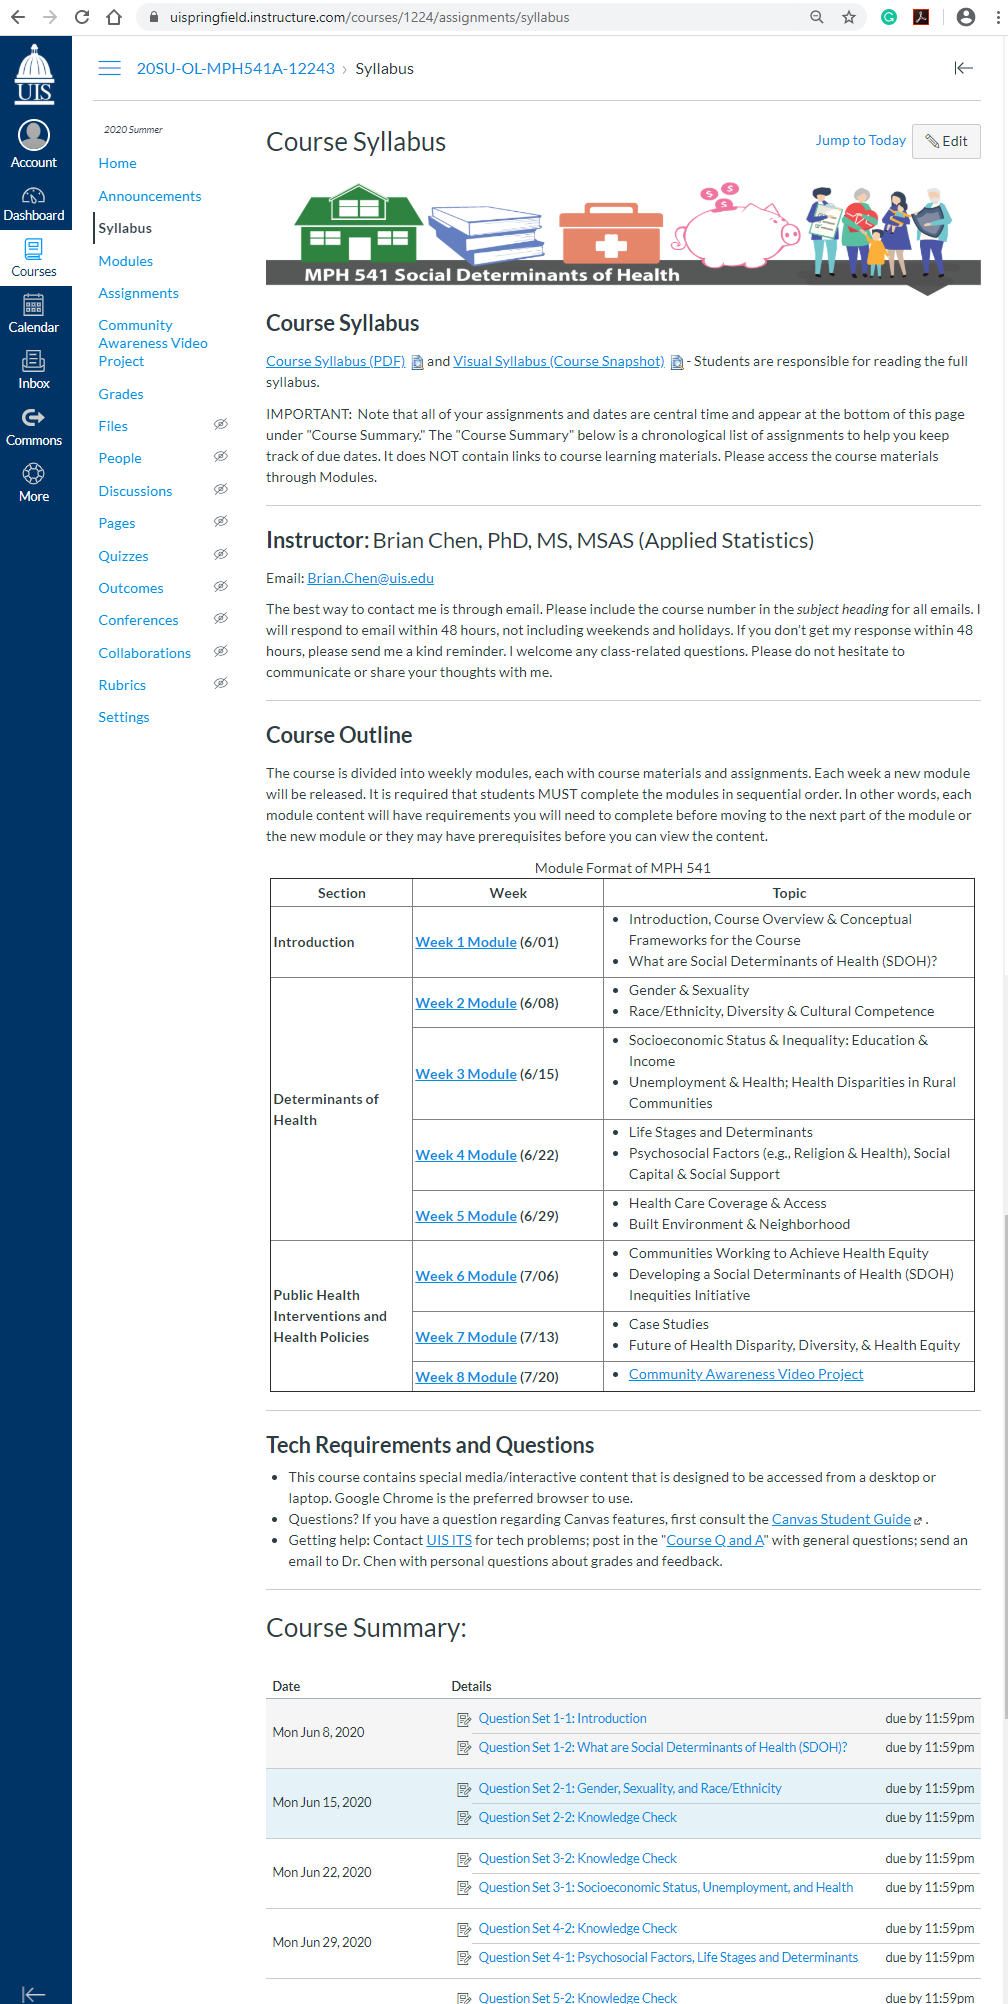 Syllabus Page displayed the instructor information, course description, course objectives and grading scheme.